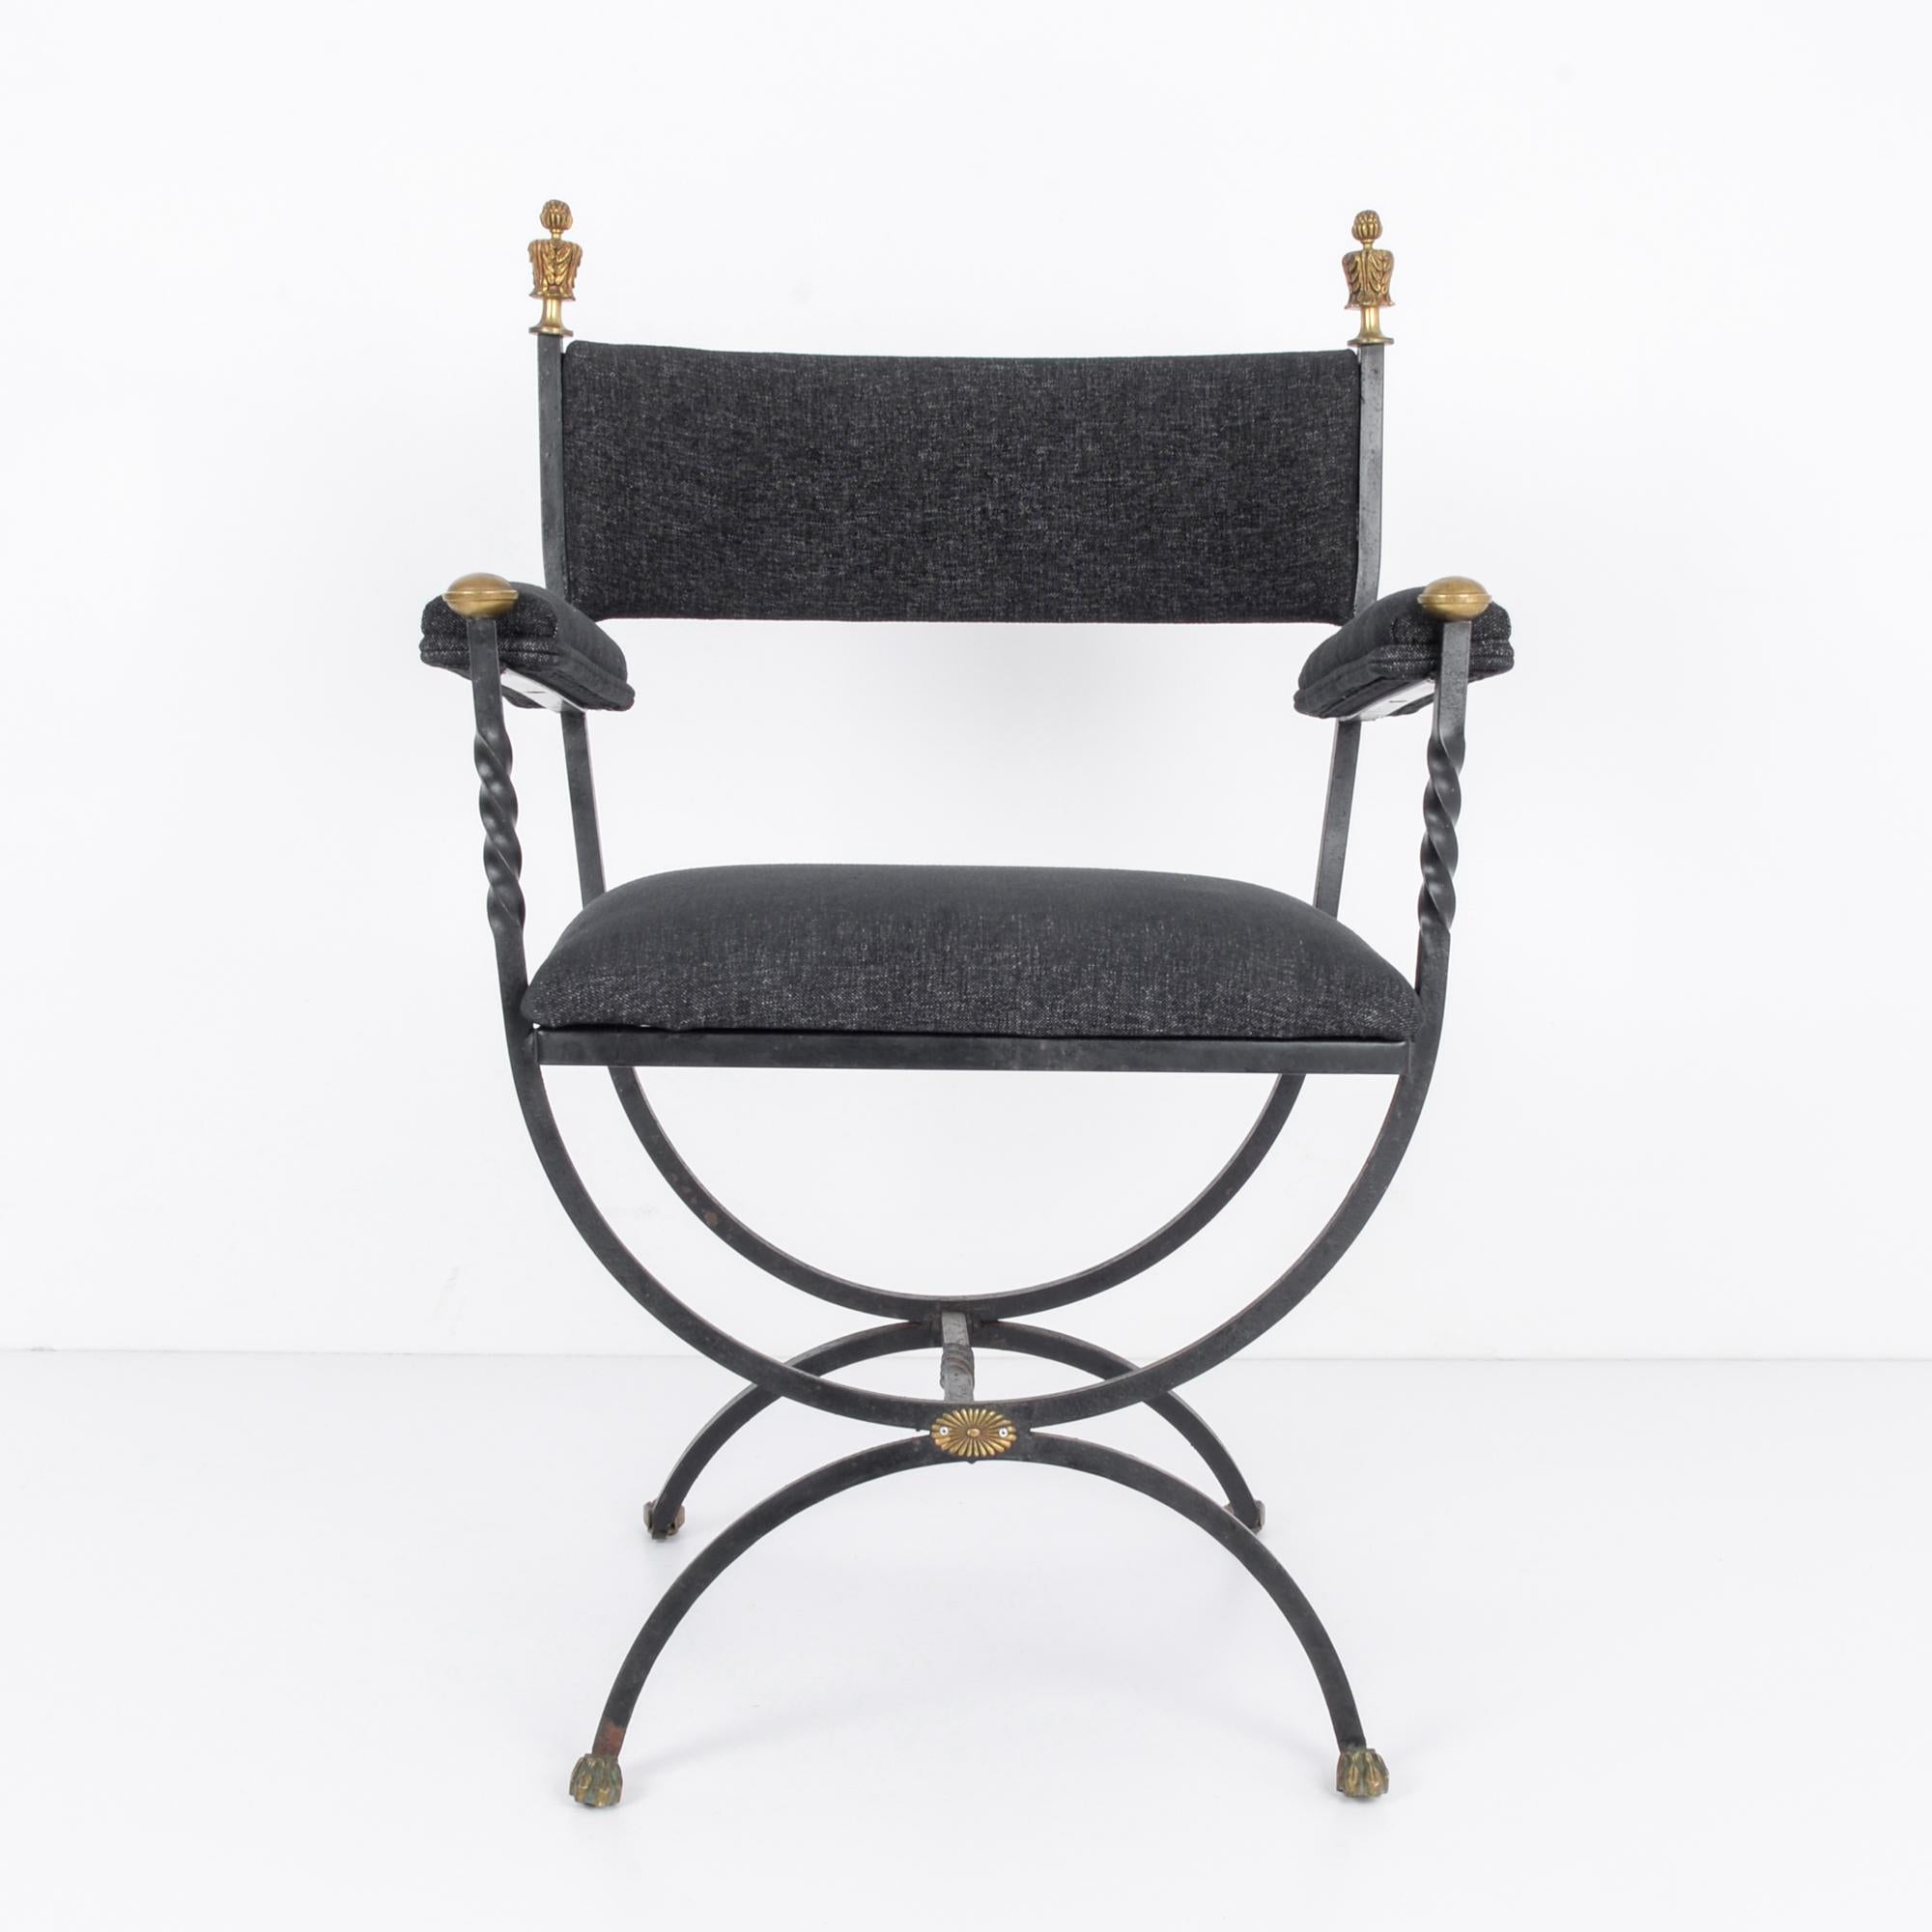 A metal armchair with an upholstered seat and back rest from Denmark, circa 1960. A frame of wrought black metal, pommelled with gold accents, creates a stark Silhouette. The seat rests on an arrangement of two inverted semi-circles, united by a